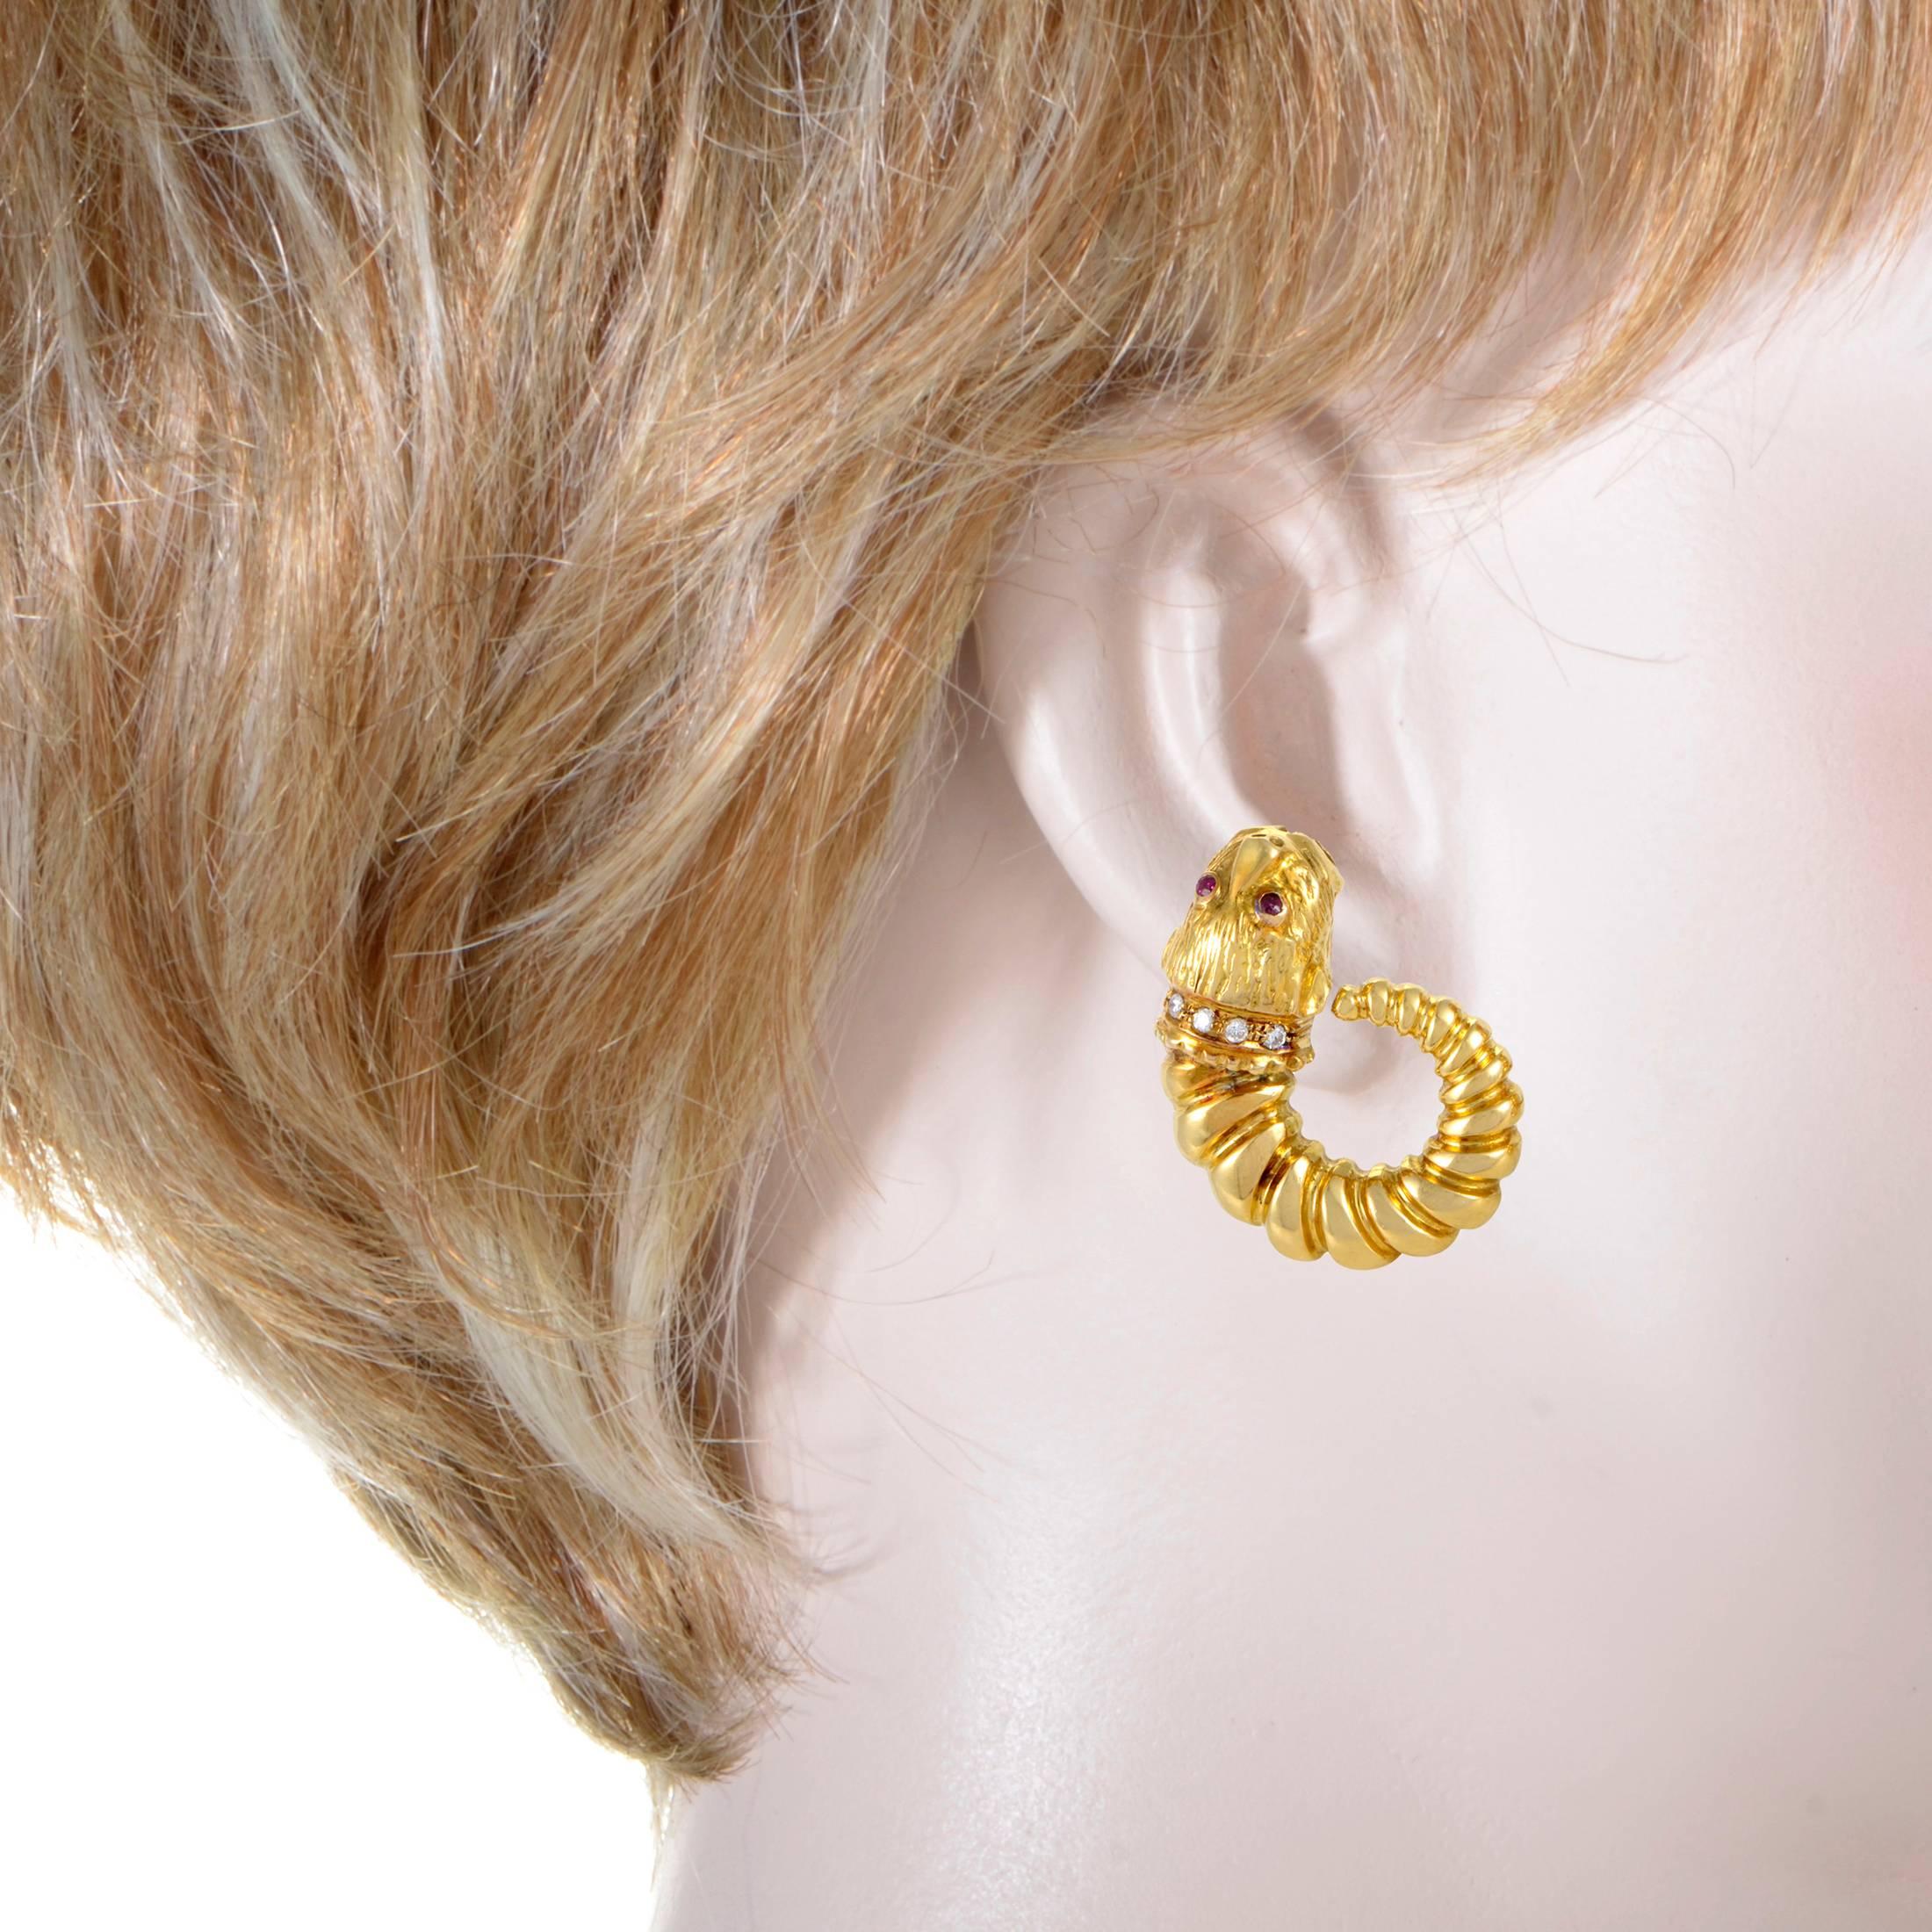 This expertly crafted pair of clip-on earrings from Ilias Lalaounis boast a unique appeal that could only come from the Greek jeweler. The earrings are made of 18K yellow gold and boast lion motifs set with .20ct of white diamonds and regal red